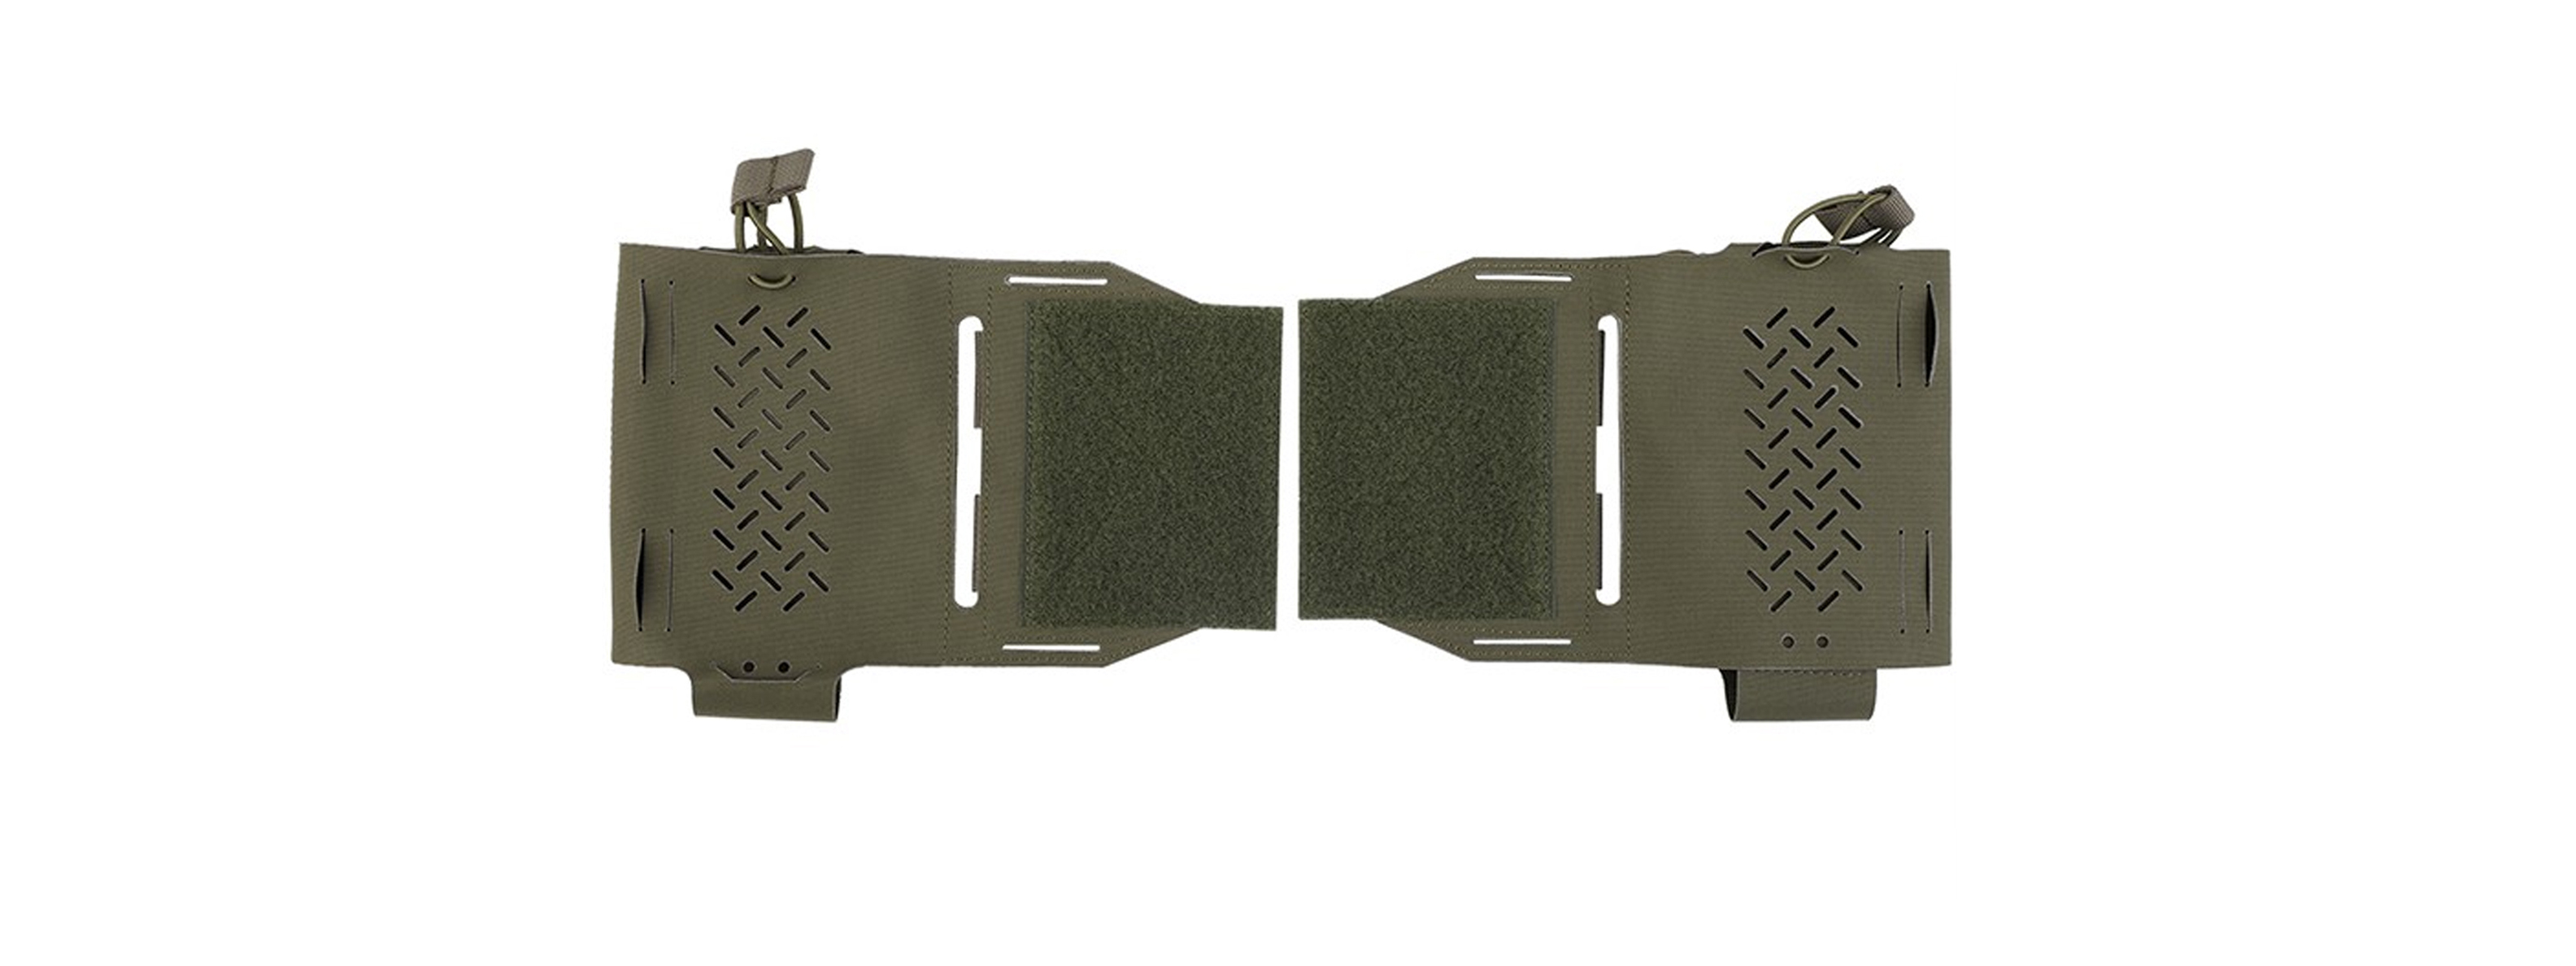 MK2 Expander Wing Pouches For Tactical Vests - (OD Green)